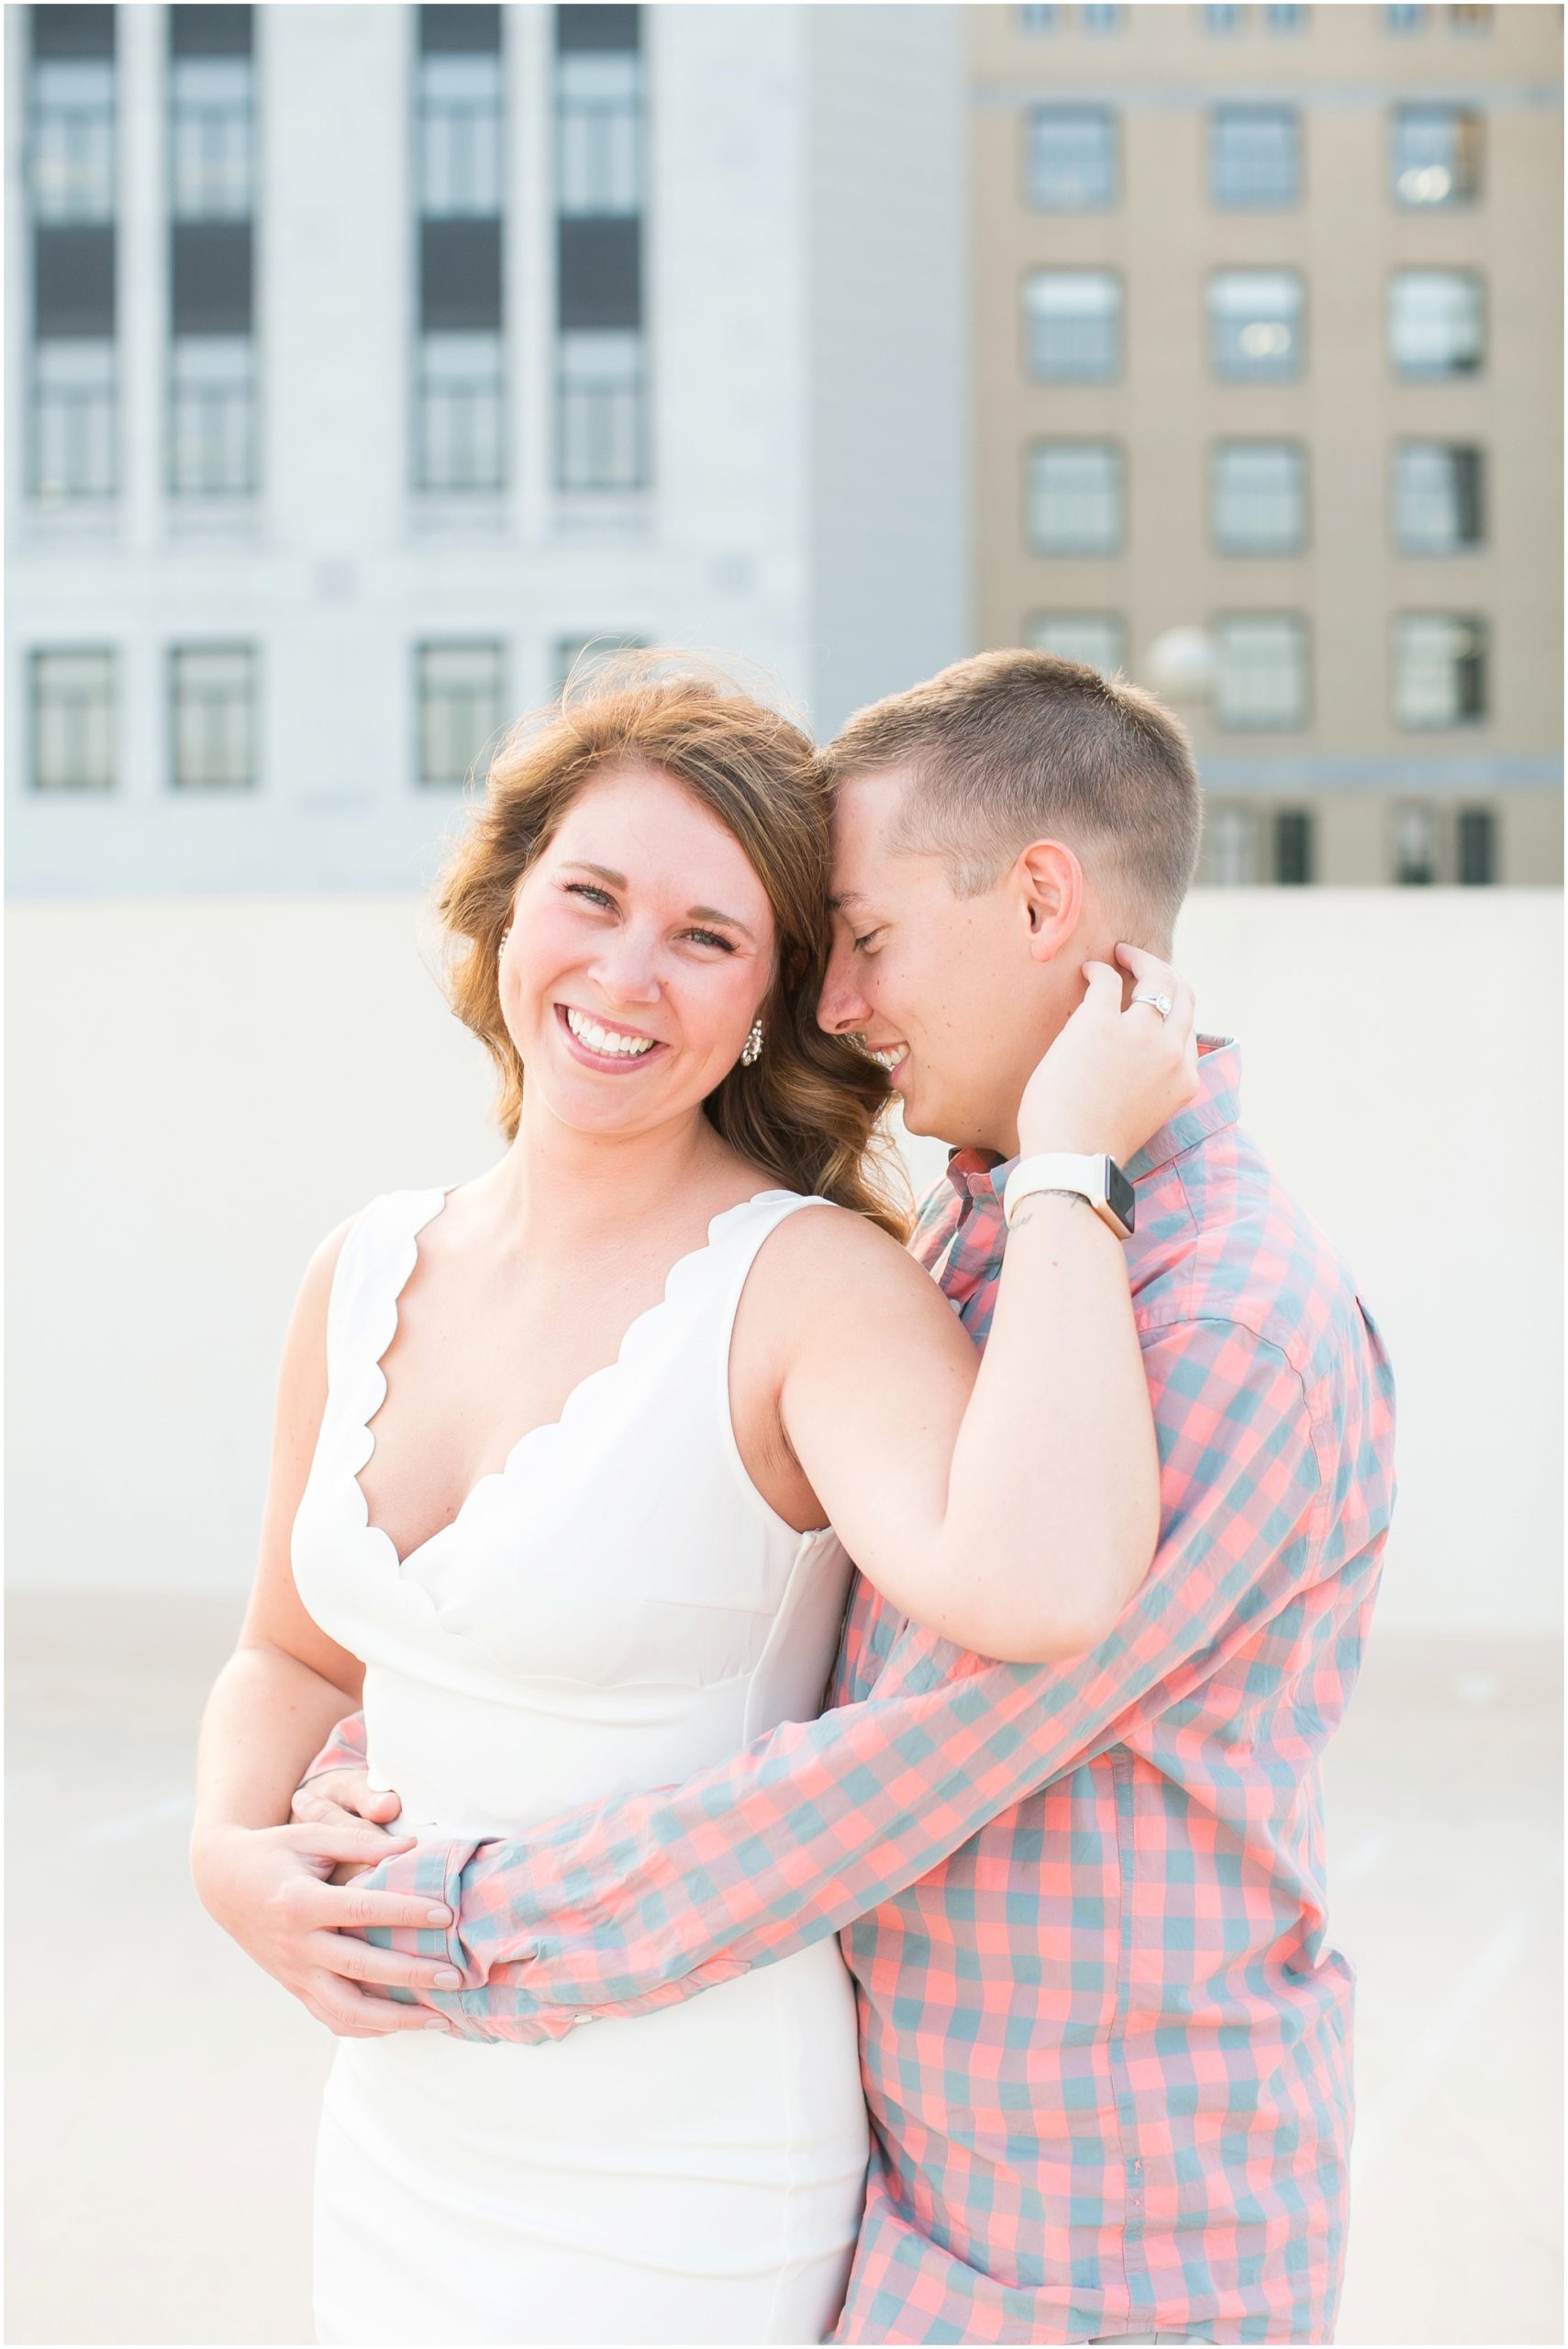 Downtown_Madison_Wisconsin_Engagement_Session_Waterfront_Monona_Terrace_0473.jpg